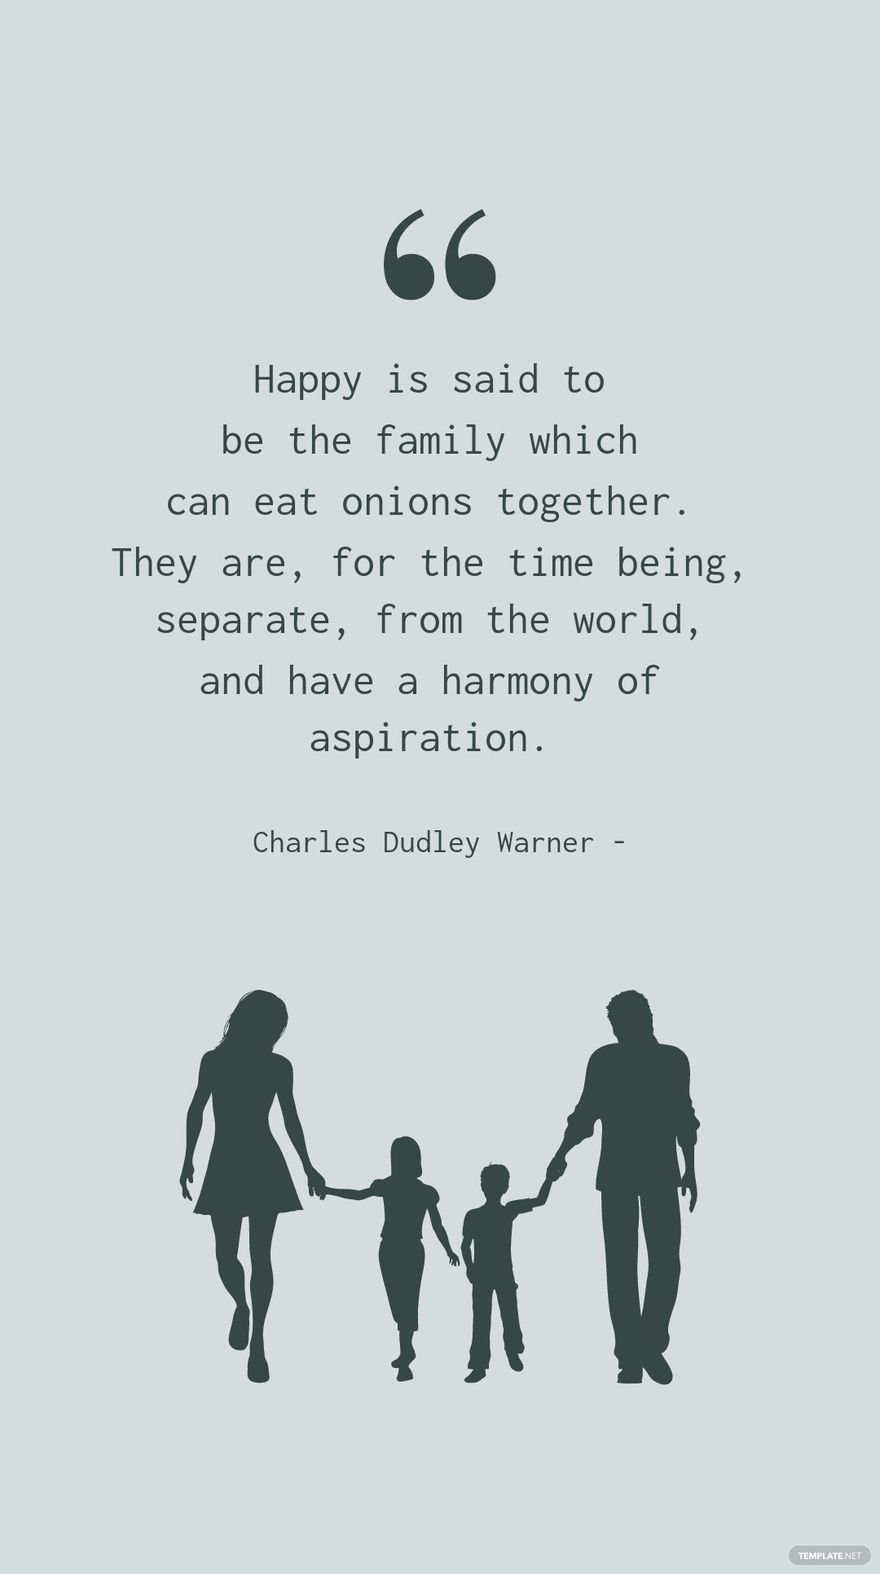 Free Charles Dudley Warner - Happy is said to be the family which can eat onions together. They are, for the time being, separate, from the world, and have a harmony of aspiration.